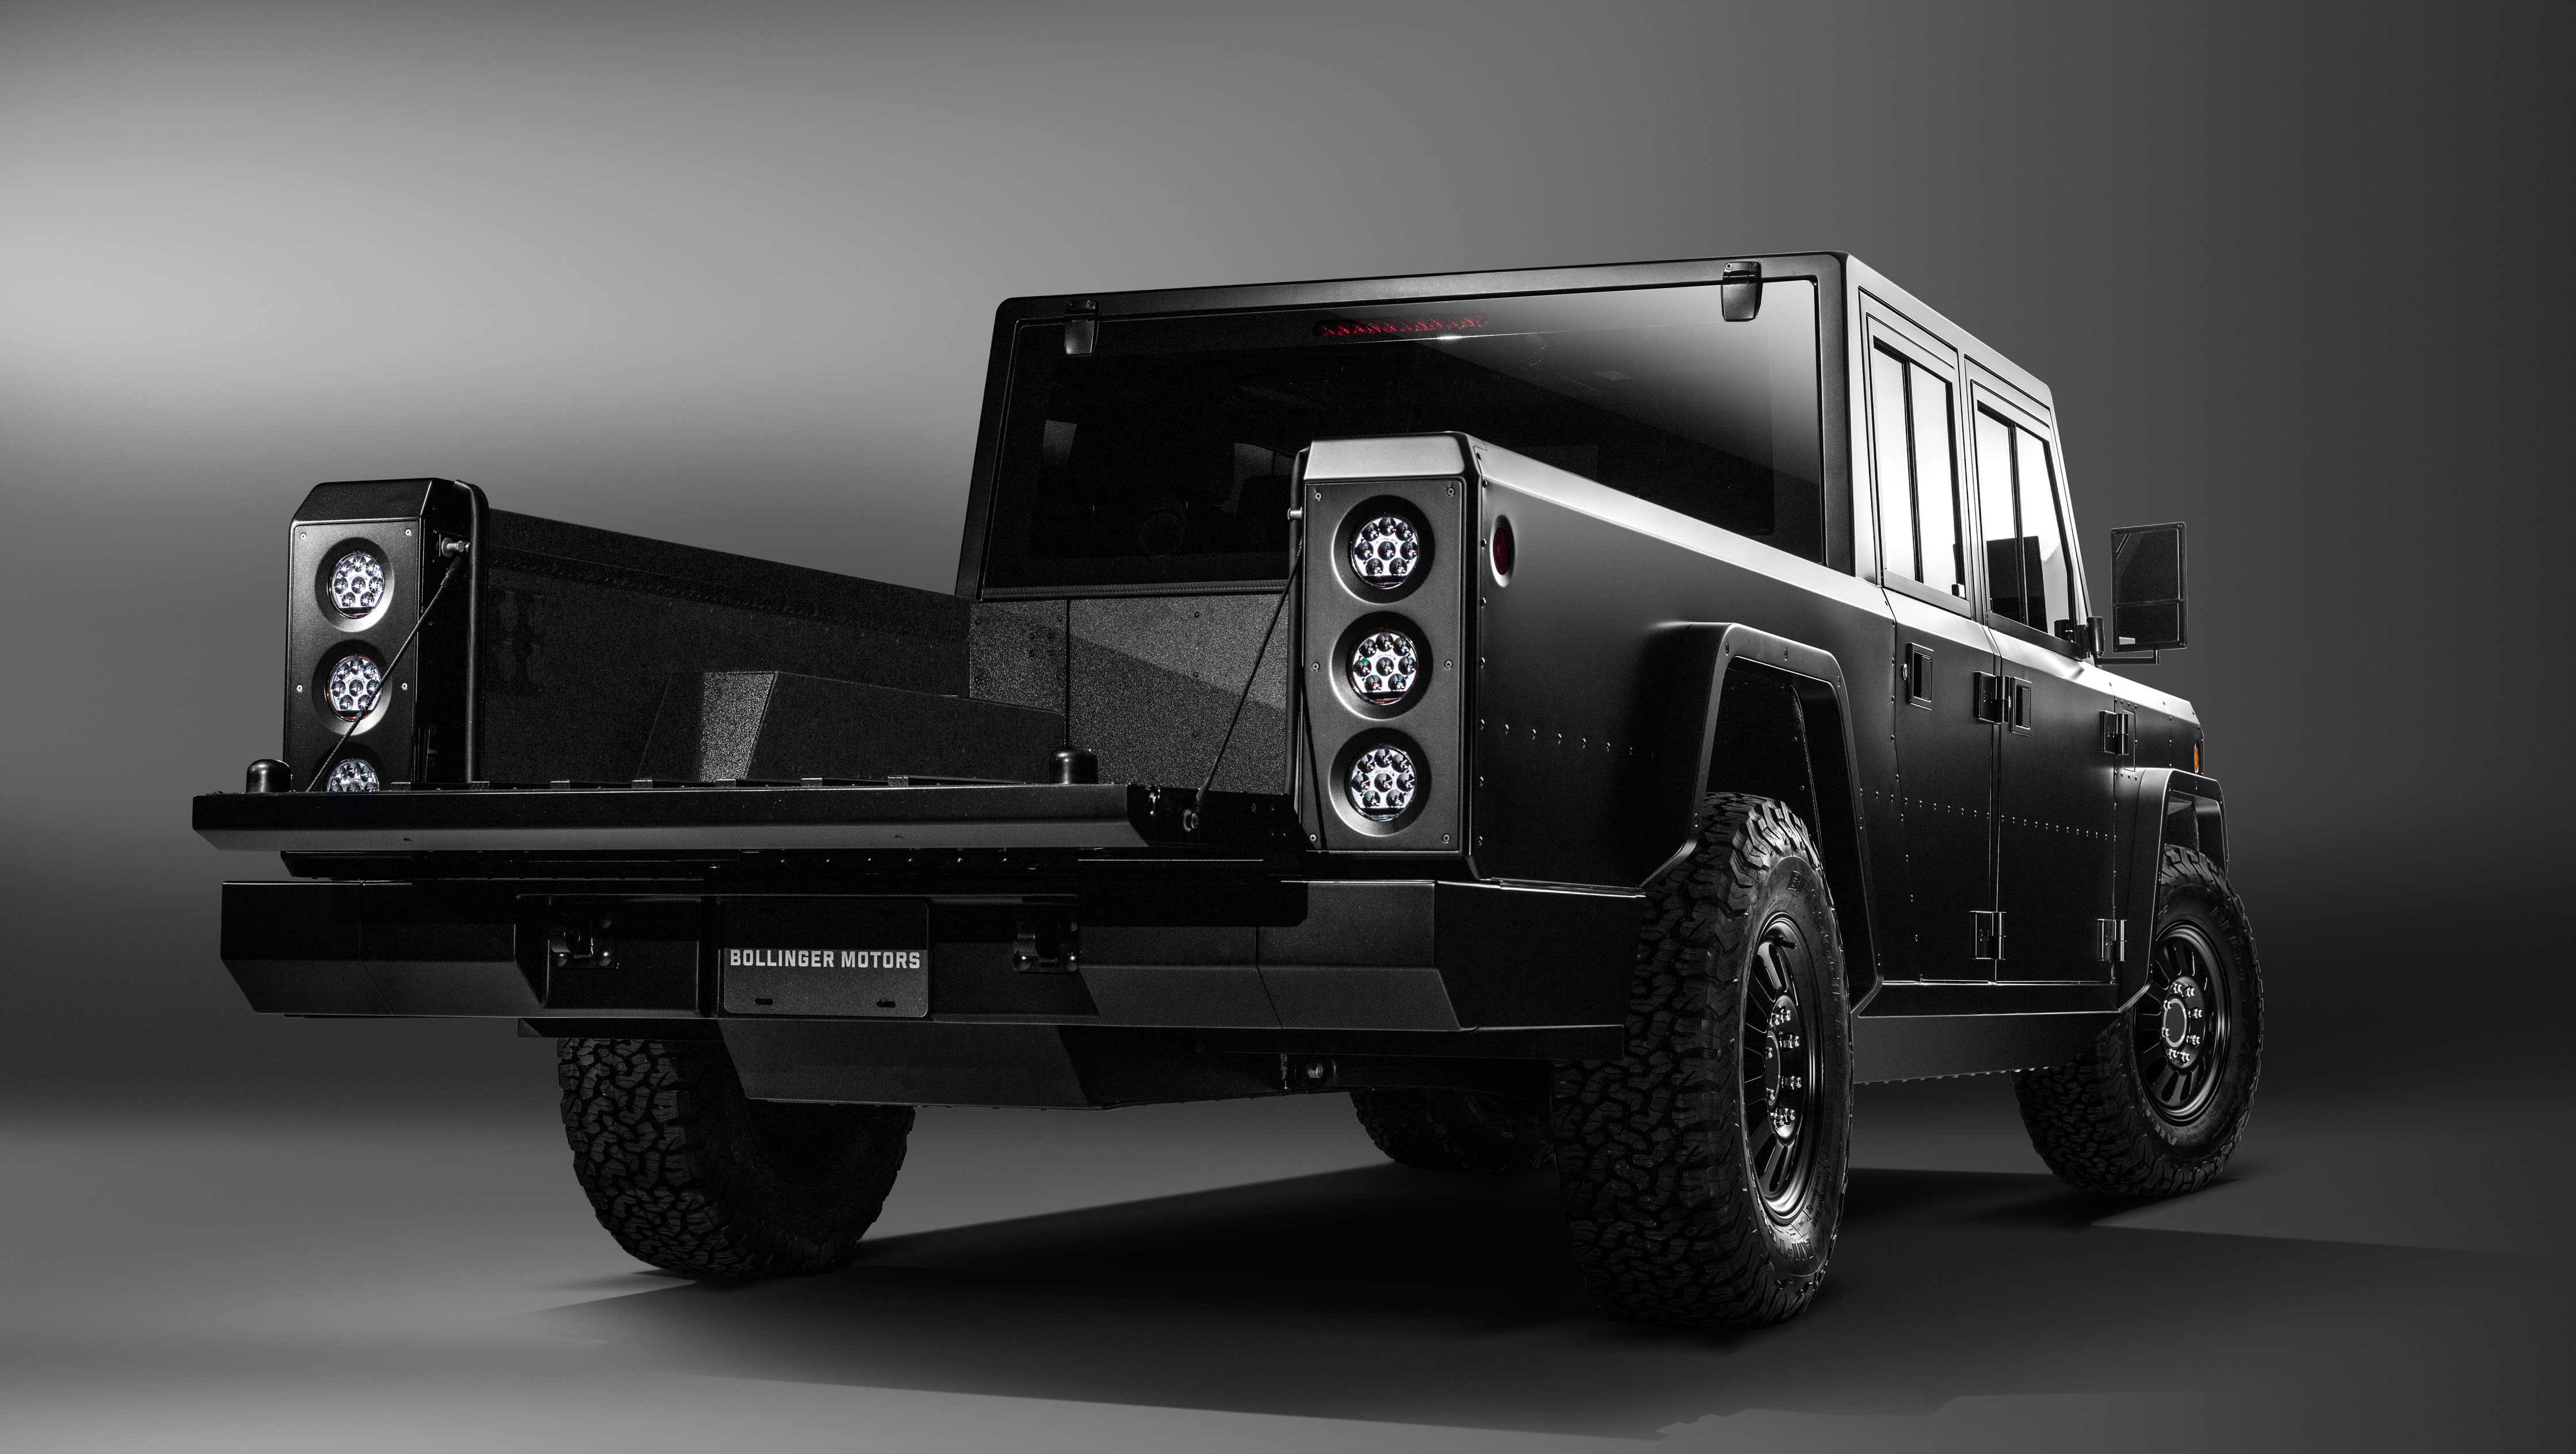 Bollinger B1 and B2 2020 Electric Land Rover Defender rival revealed